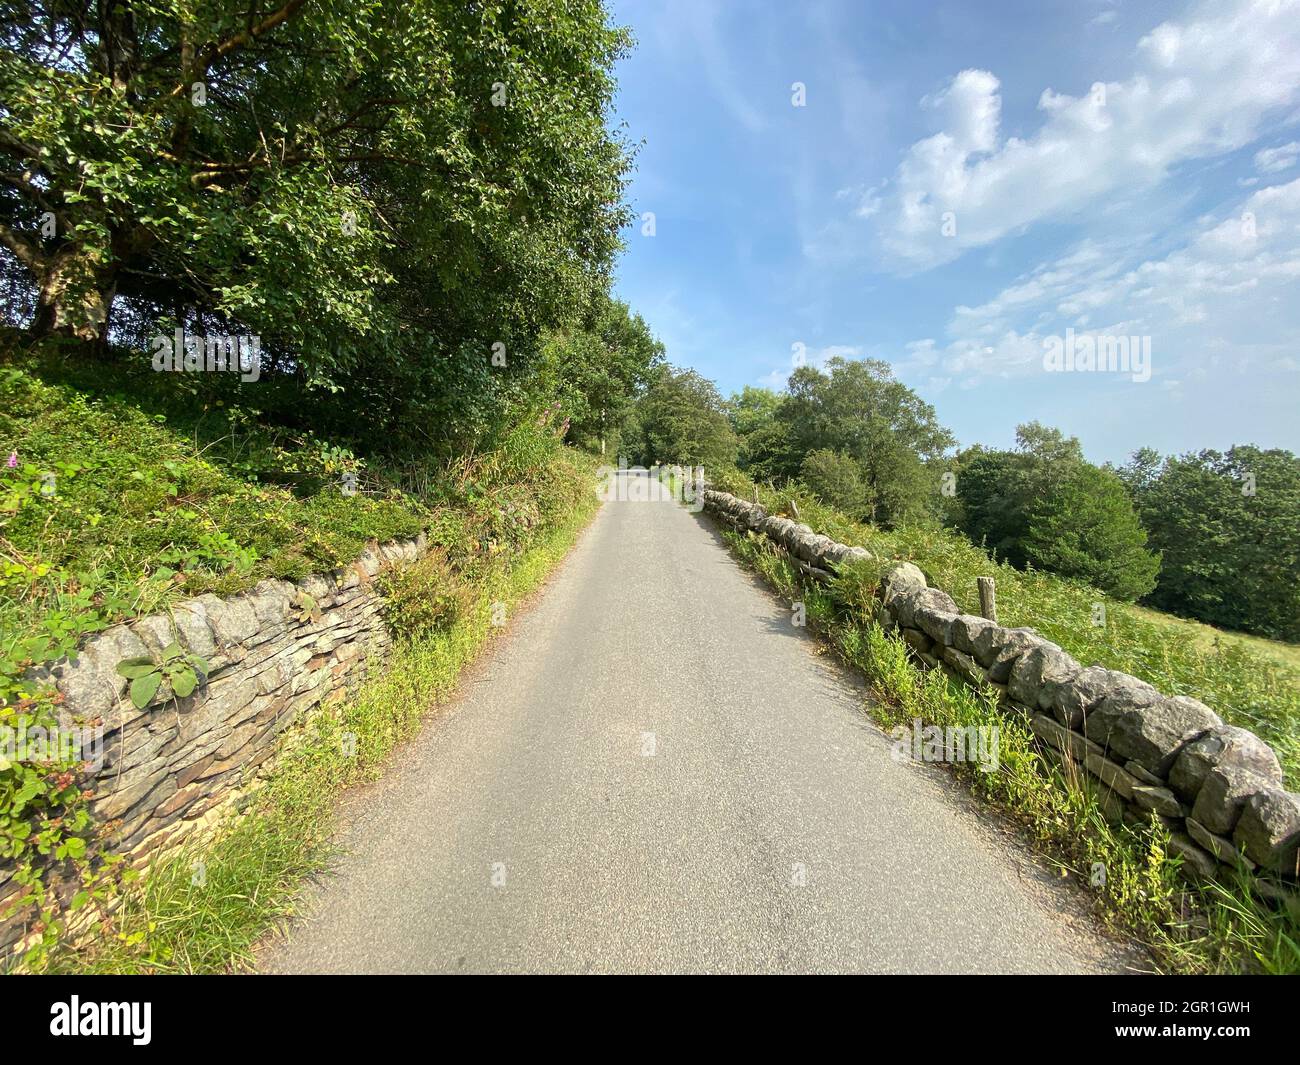 Looking Along, Hey's Lane, With Dry Stone Walls, Fields, And Old Trees In, Wainstalls, Halifax, Uk Stock Photo